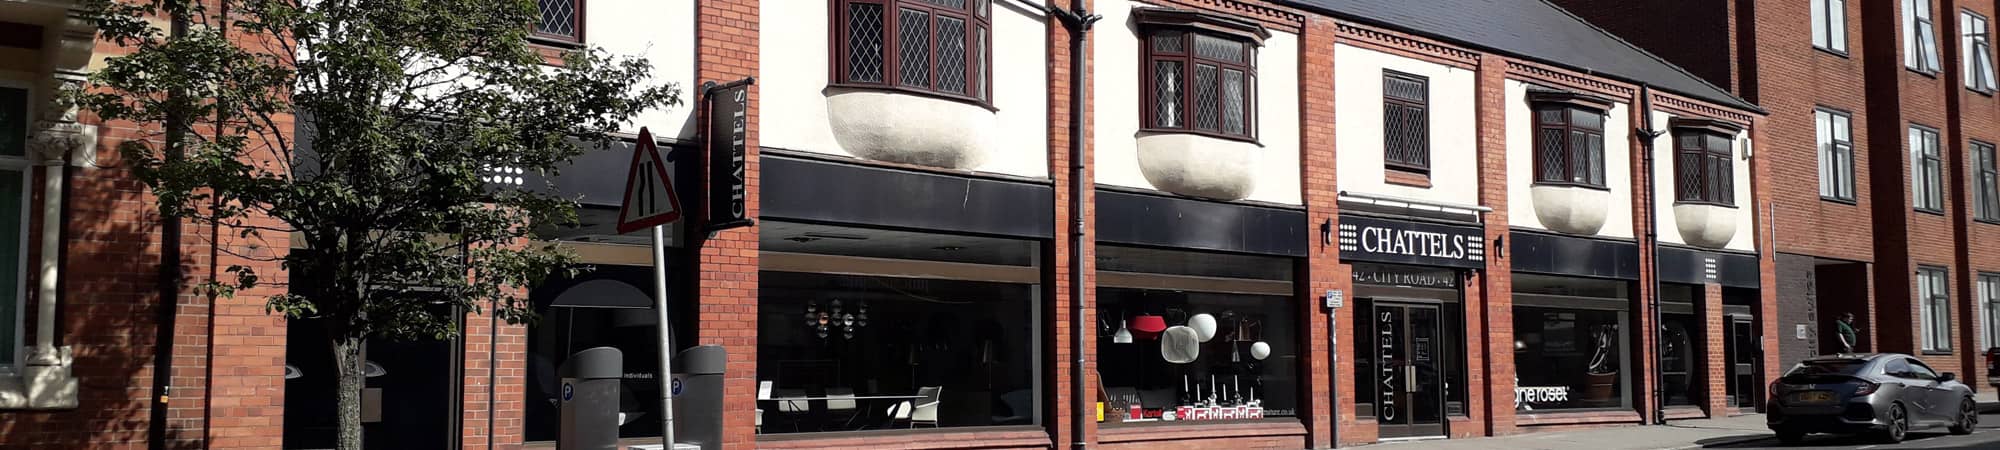 Exterior of Chattels showroom in Chester city centre